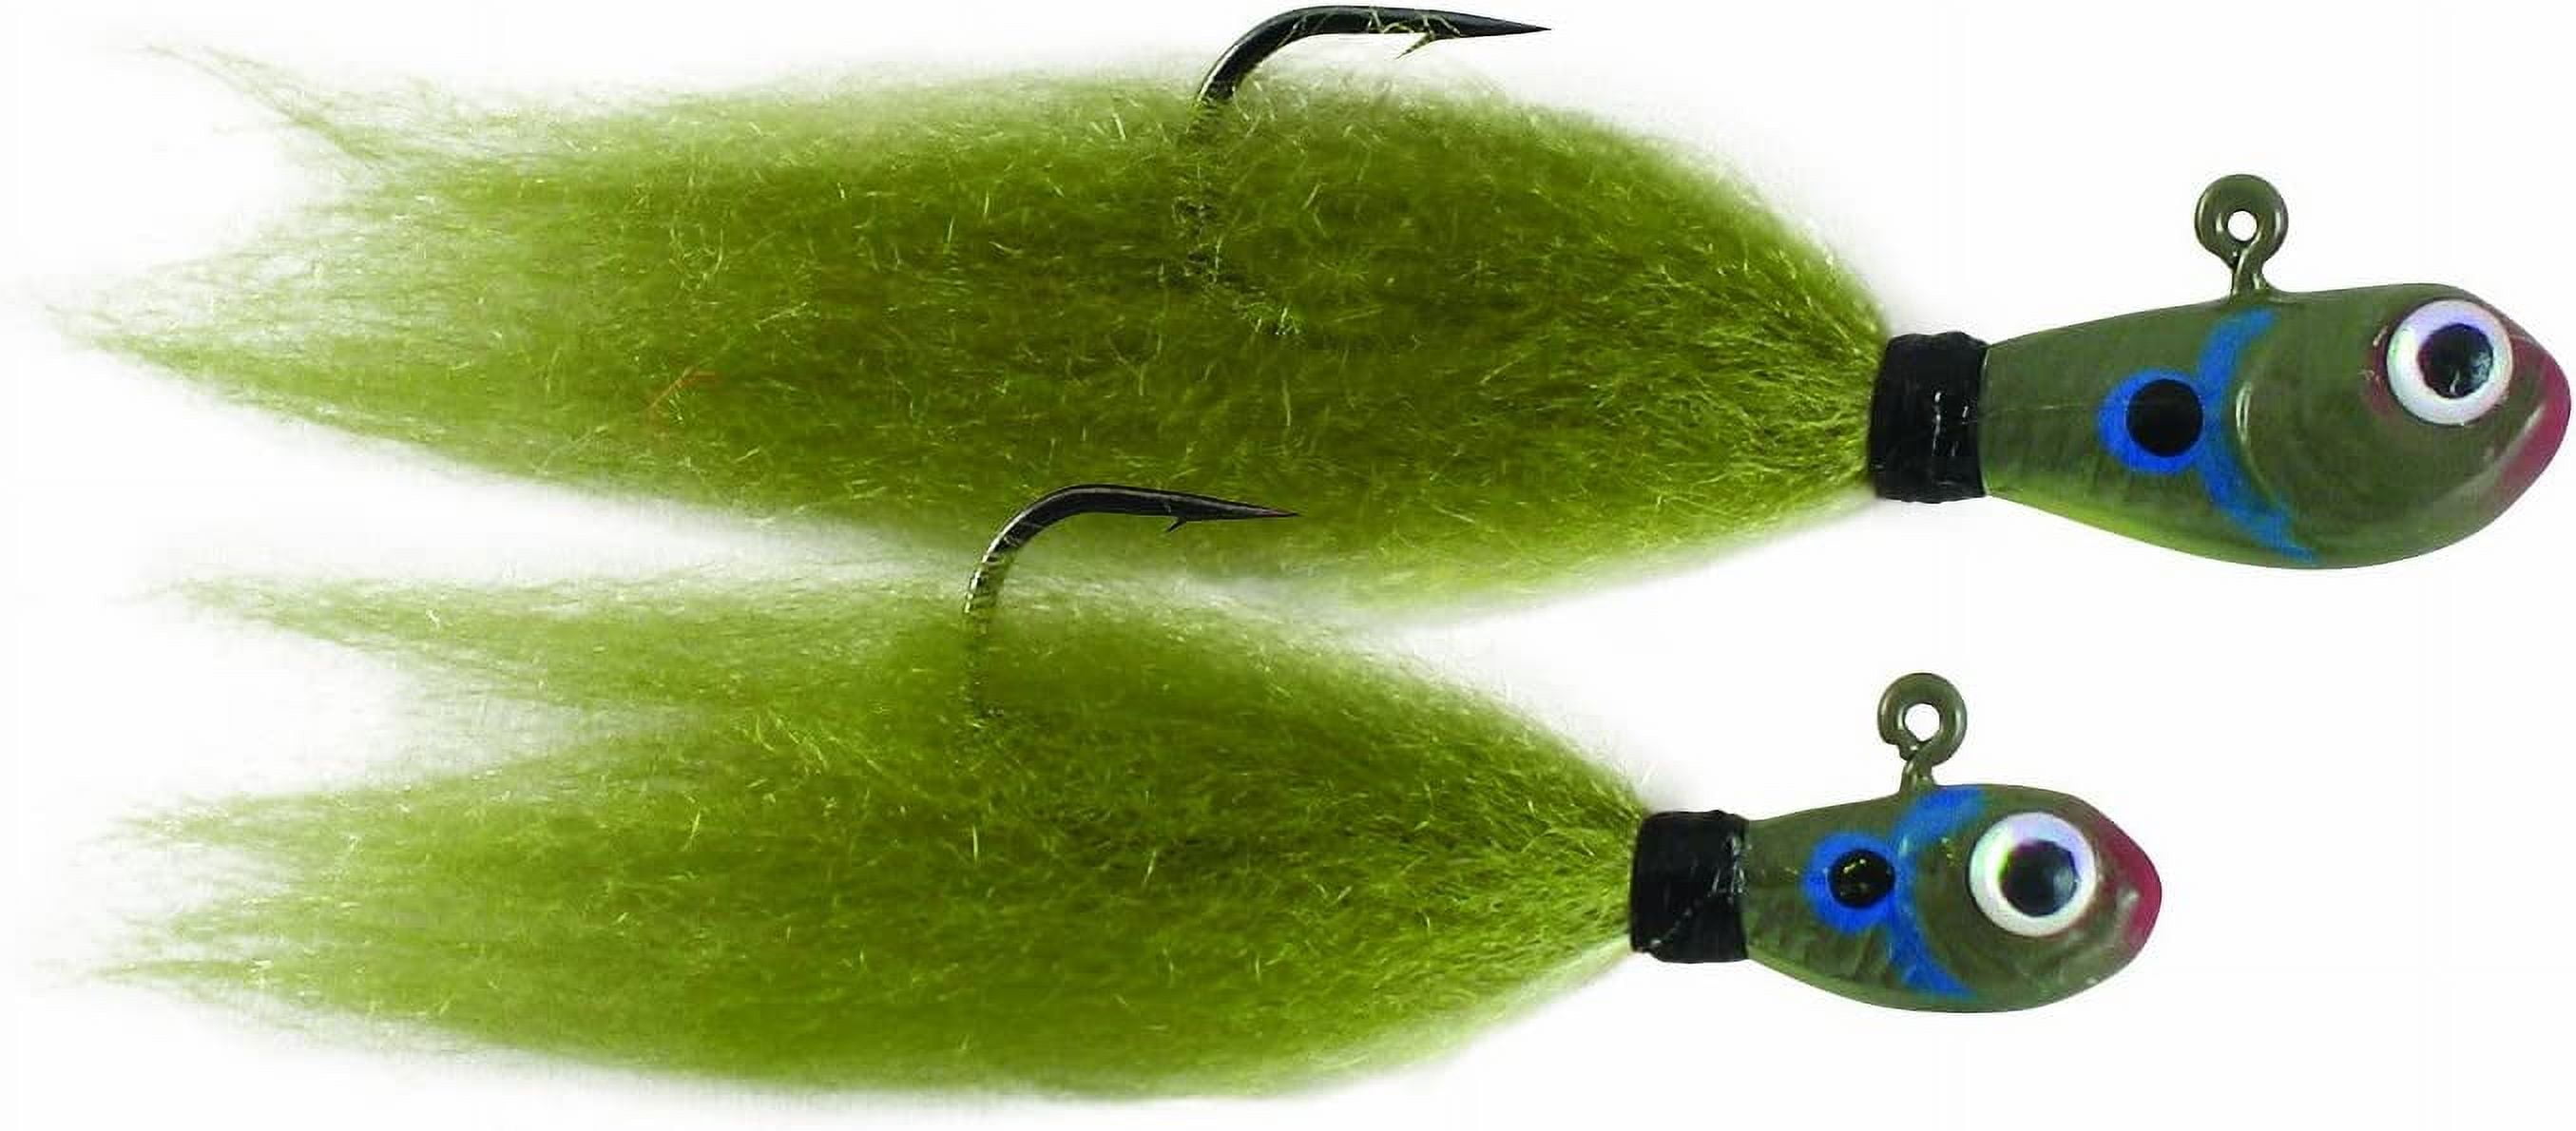 Spro Paht Flies-Pack of 2, Blue Gill, 1/8-Ounce 